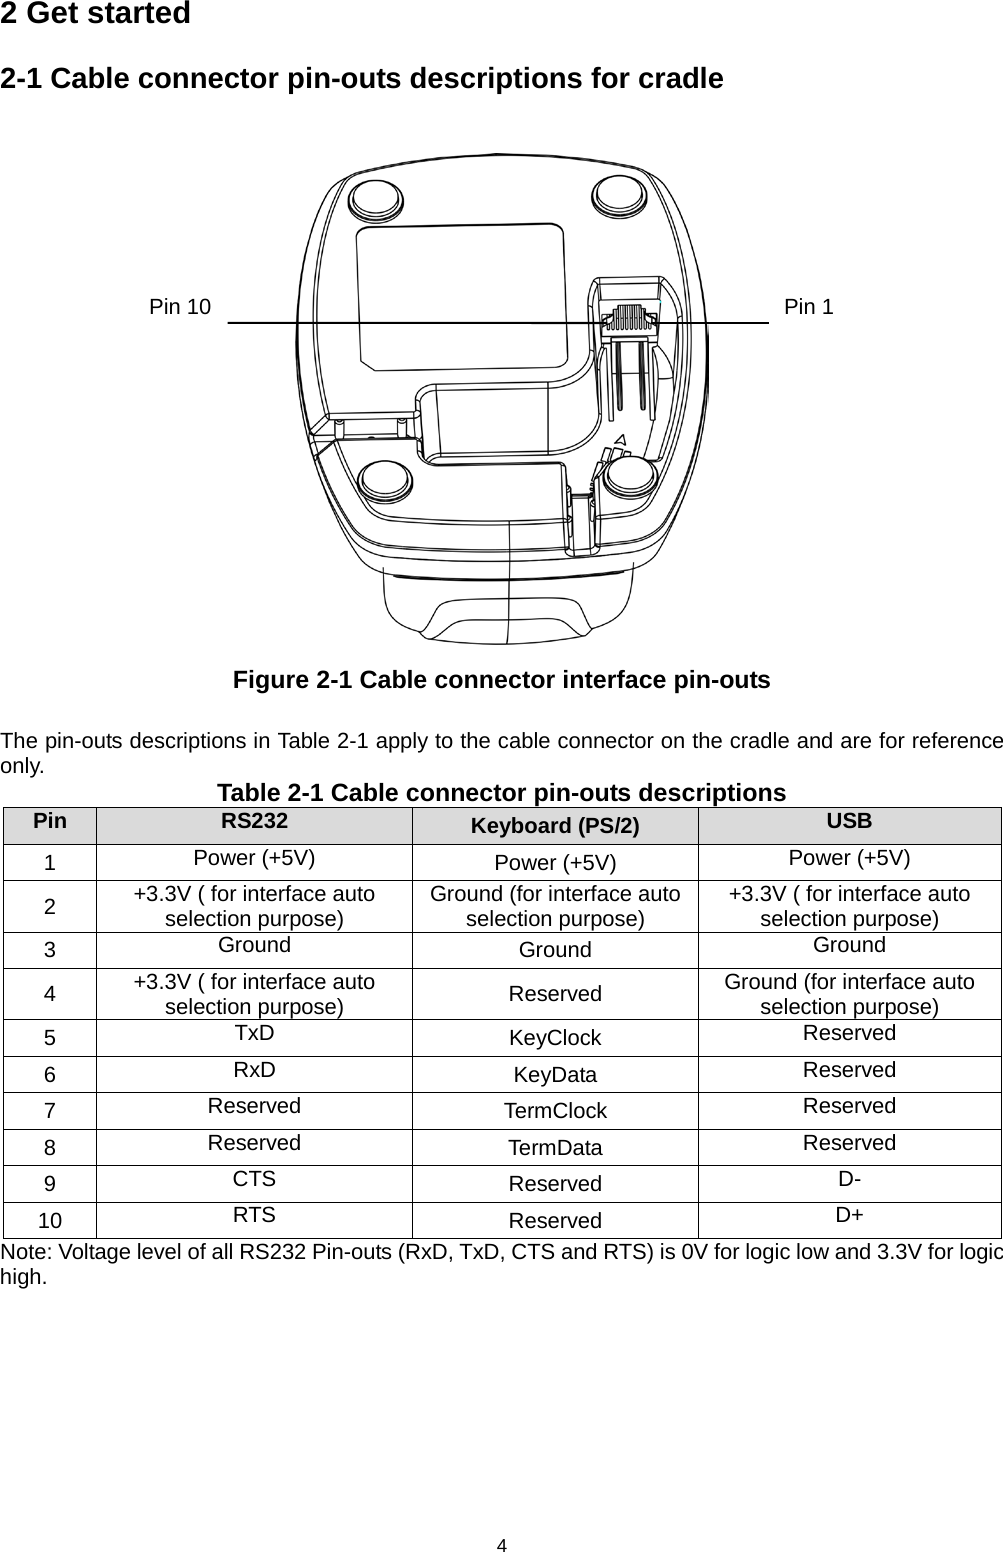 4 2 Get started 2-1 Cable connector pin-outs descriptions for cradle   Figure 2-1 Cable connector interface pin-outs  The pin-outs descriptions in Table 2-1 apply to the cable connector on the cradle and are for reference only.   Table 2-1 Cable connector pin-outs descriptions Pin RS232 Keyboard (PS/2) USB 1 Power (+5V) Power (+5V) Power (+5V) 2 +3.3V ( for interface auto selection purpose) Ground (for interface auto selection purpose) +3.3V ( for interface auto selection purpose) 3 Ground Ground Ground 4 +3.3V ( for interface auto selection purpose) Reserved Ground (for interface auto selection purpose) 5 TxD KeyClock Reserved 6 RxD KeyData Reserved 7 Reserved TermClock Reserved 8 Reserved TermData Reserved 9 CTS Reserved D- 10 RTS Reserved D+ Note: Voltage level of all RS232 Pin-outs (RxD, TxD, CTS and RTS) is 0V for logic low and 3.3V for logic high.  Pin 1 Pin 10 